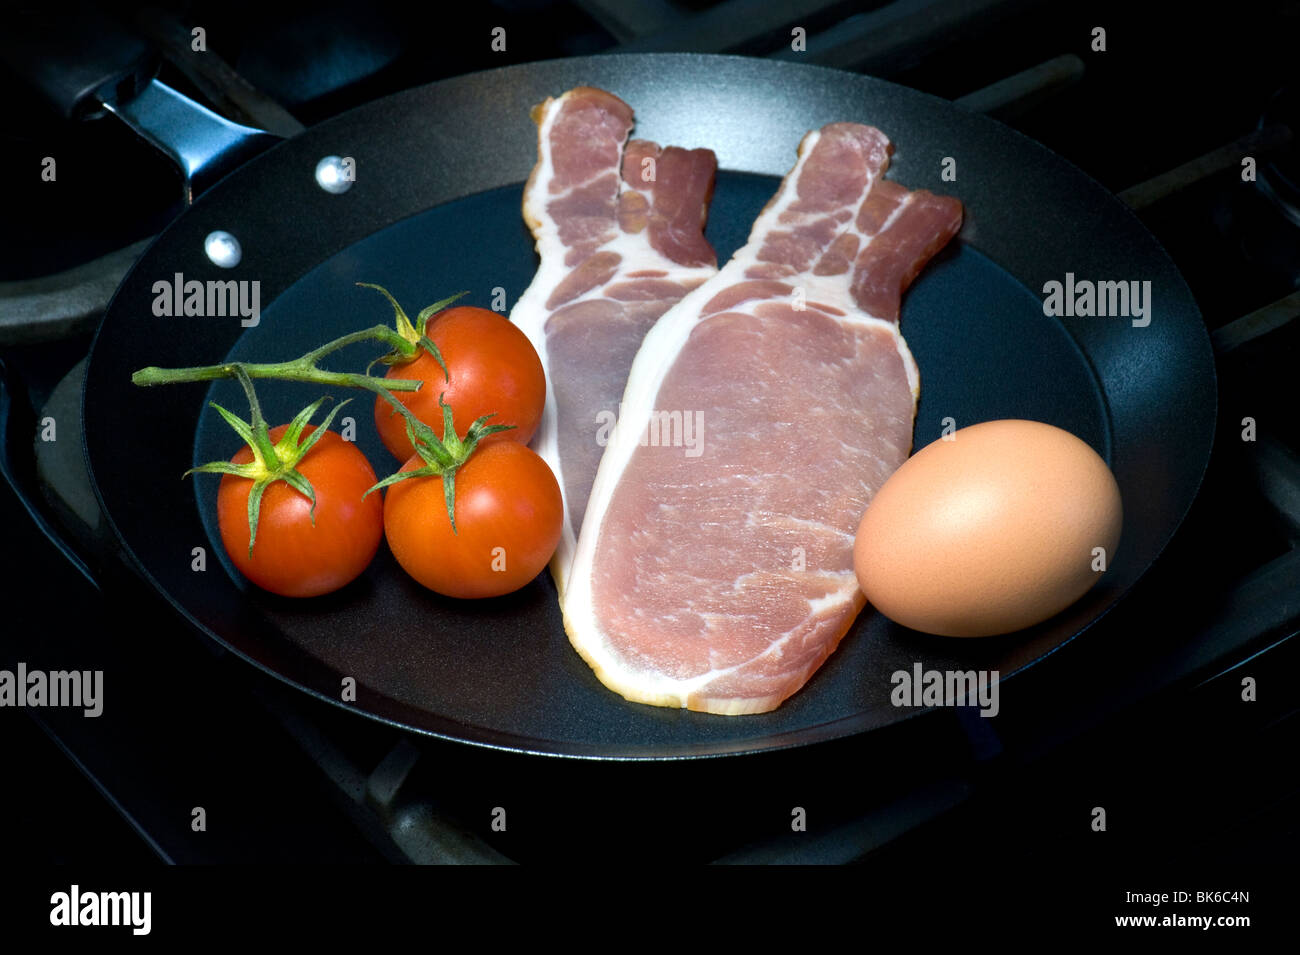 Egg, Bacon and Tomato, Ingredients For A Traditional English Breakfast Stock Photo